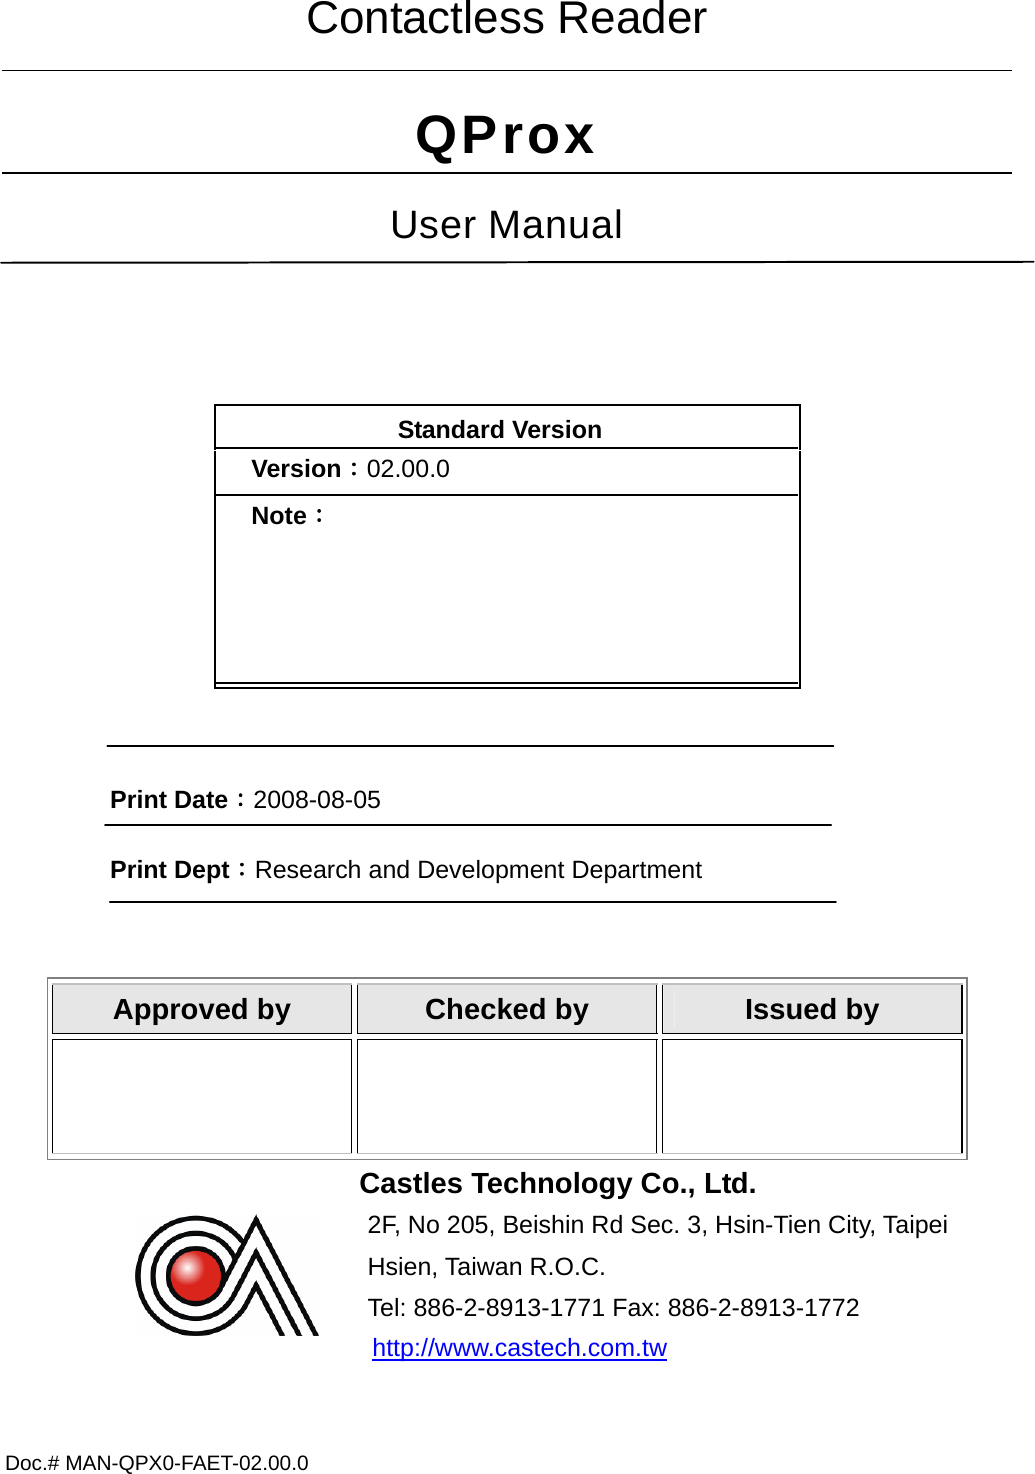 Doc.# MAN-QPX0-FAET-02.00.0     Contactless Reader QProx User Manual  Standard Version Version：02.00.0 Note：  Print Date：2008-08-05 Print Dept：Research and Development Department  Approved by  Checked by  Issued by    Castles Technology Co., Ltd. 2F, No 205, Beishin Rd Sec. 3, Hsin-Tien City, Taipei             Hsien, Taiwan R.O.C. Tel: 886-2-8913-1771 Fax: 886-2-8913-1772  http://www.castech.com.tw   